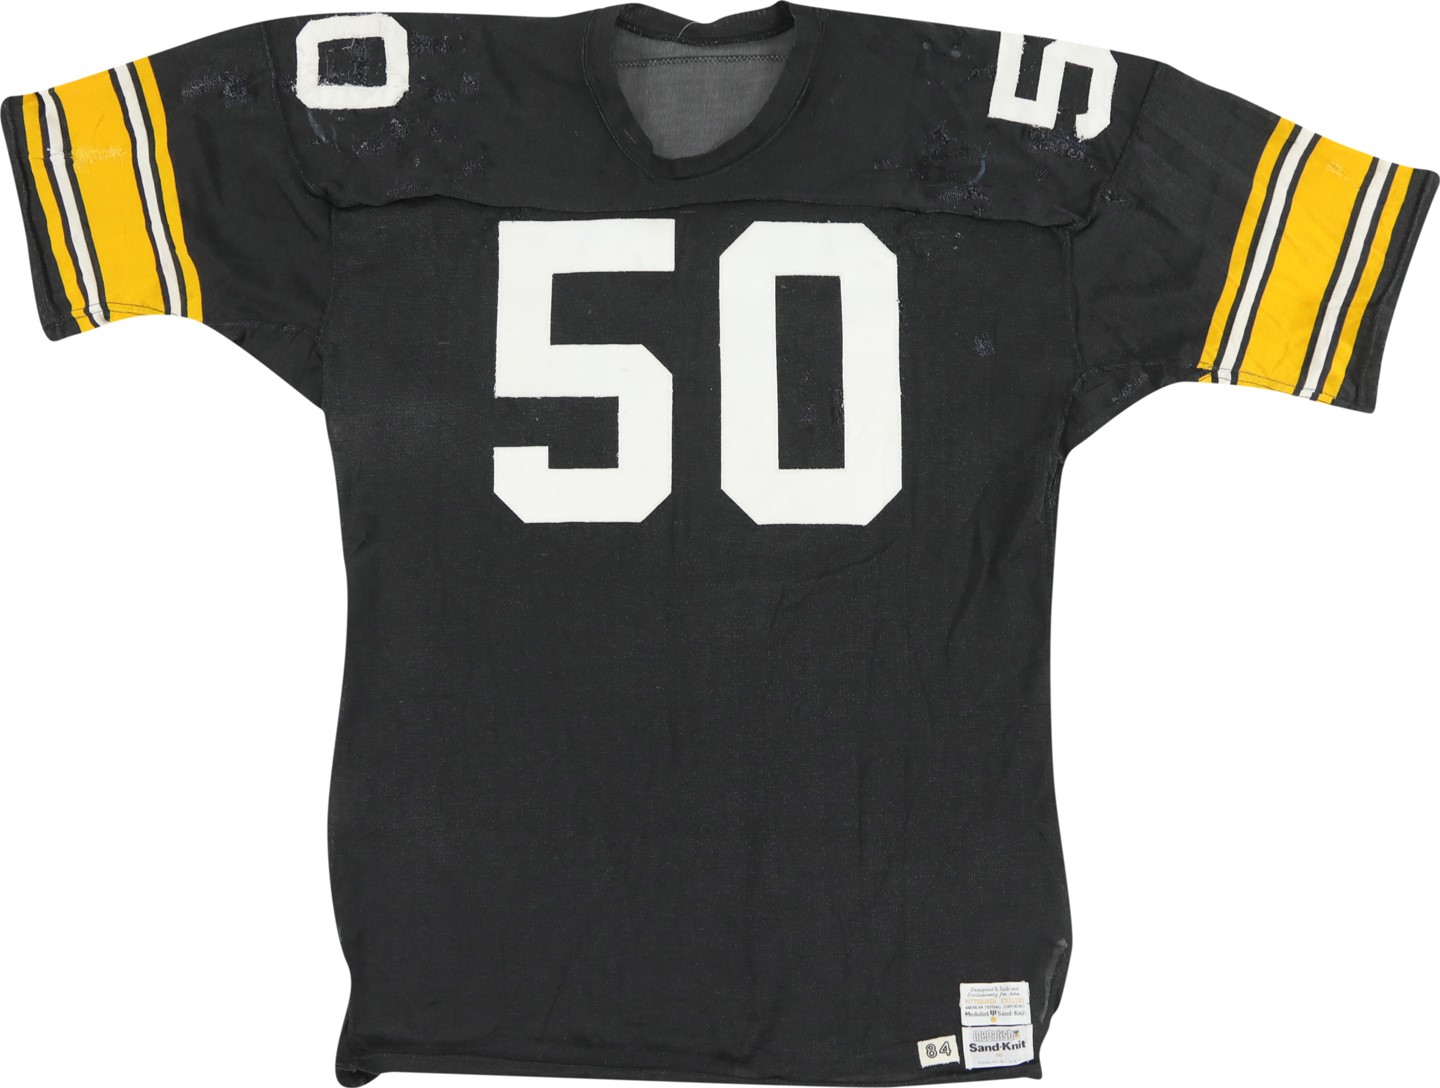 The Pittsburgh Steelers Game Worn Jersey Archive - 1984 David Little Game Worn Pittsburgh Steelers Jersey